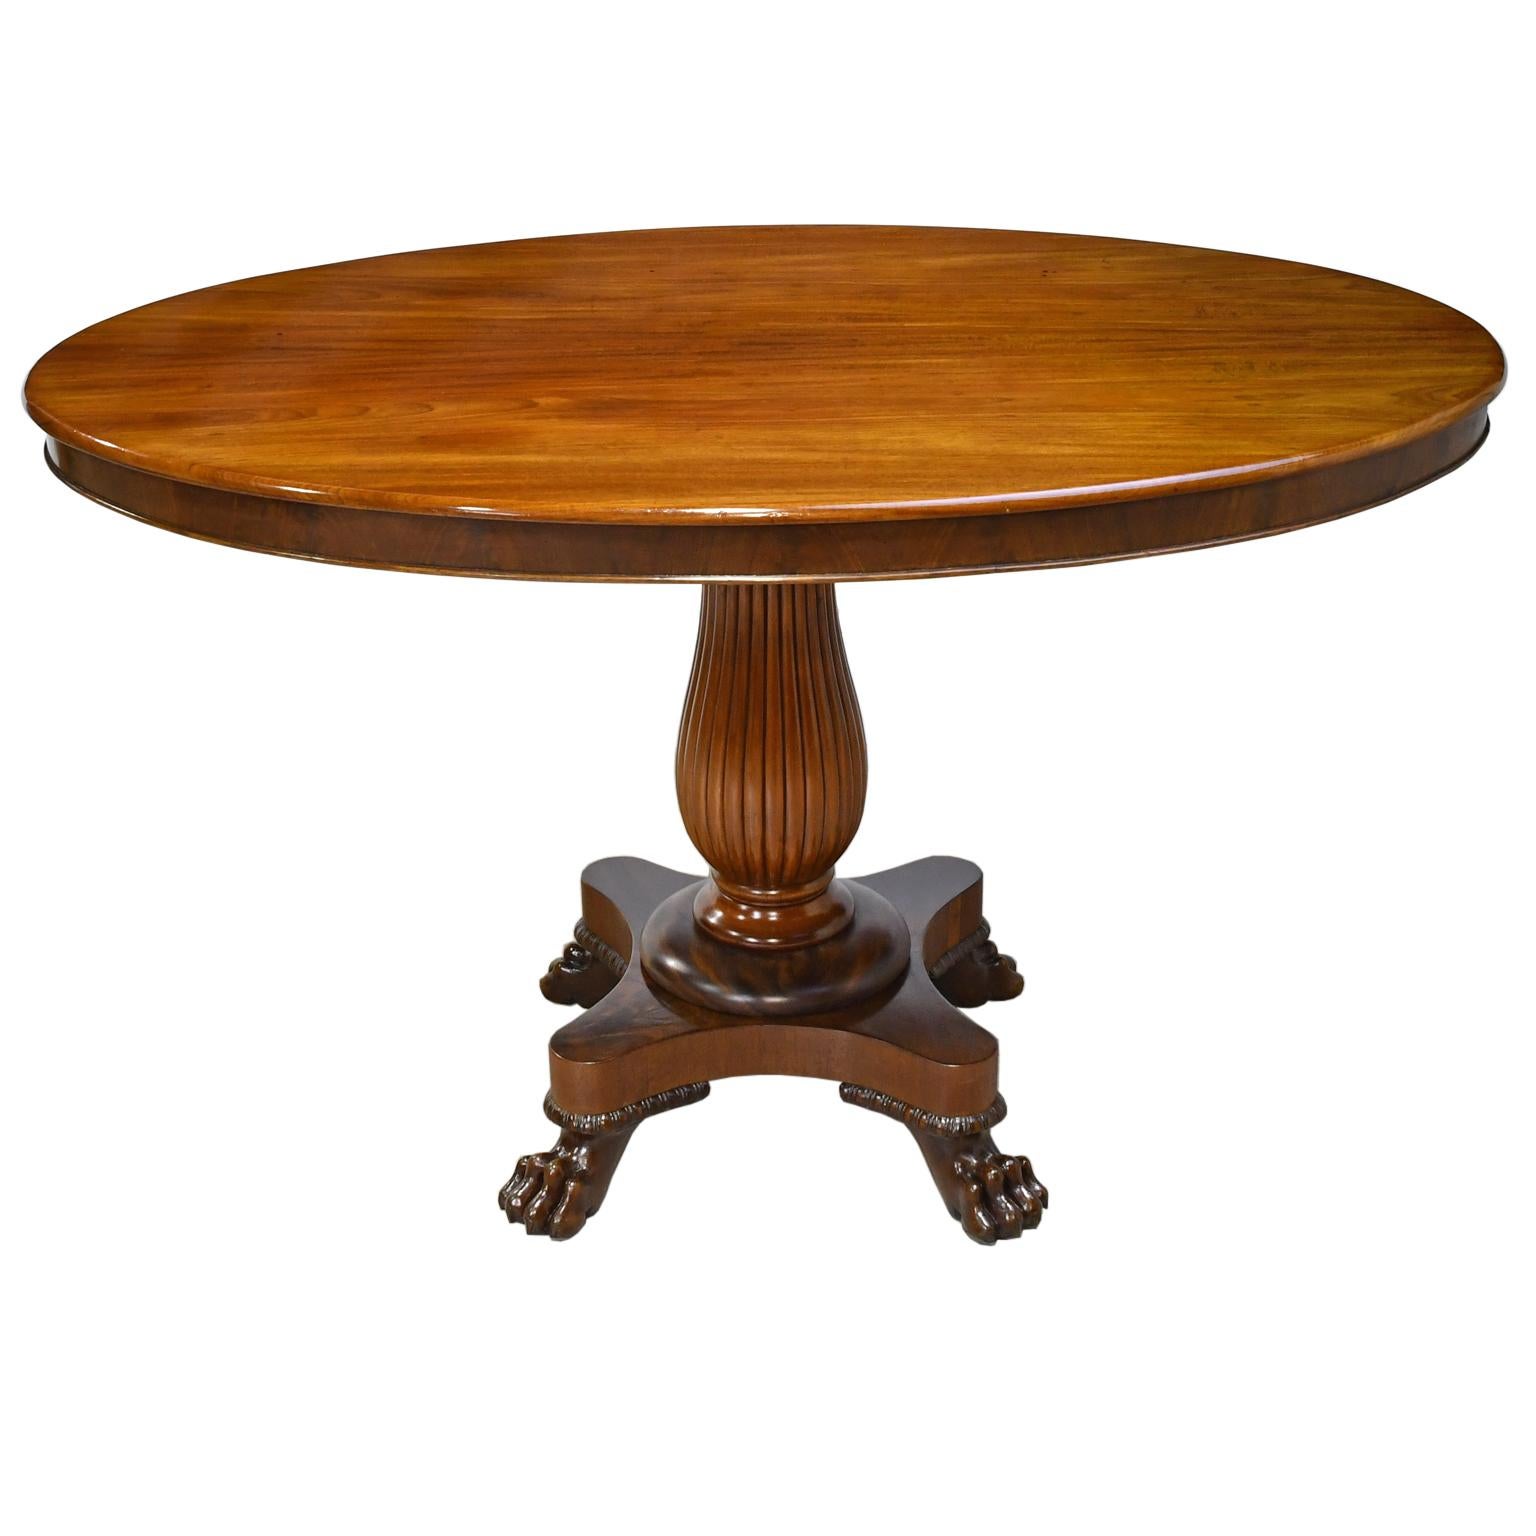 An exceptional Empire salon or tea table in fine West Indies mahogany with oval top on vase-turned and fluted column resting on quatre-form pedestal base with carved lions' paw feet. Denmark, circa 1825. Historically, this table would have graced a